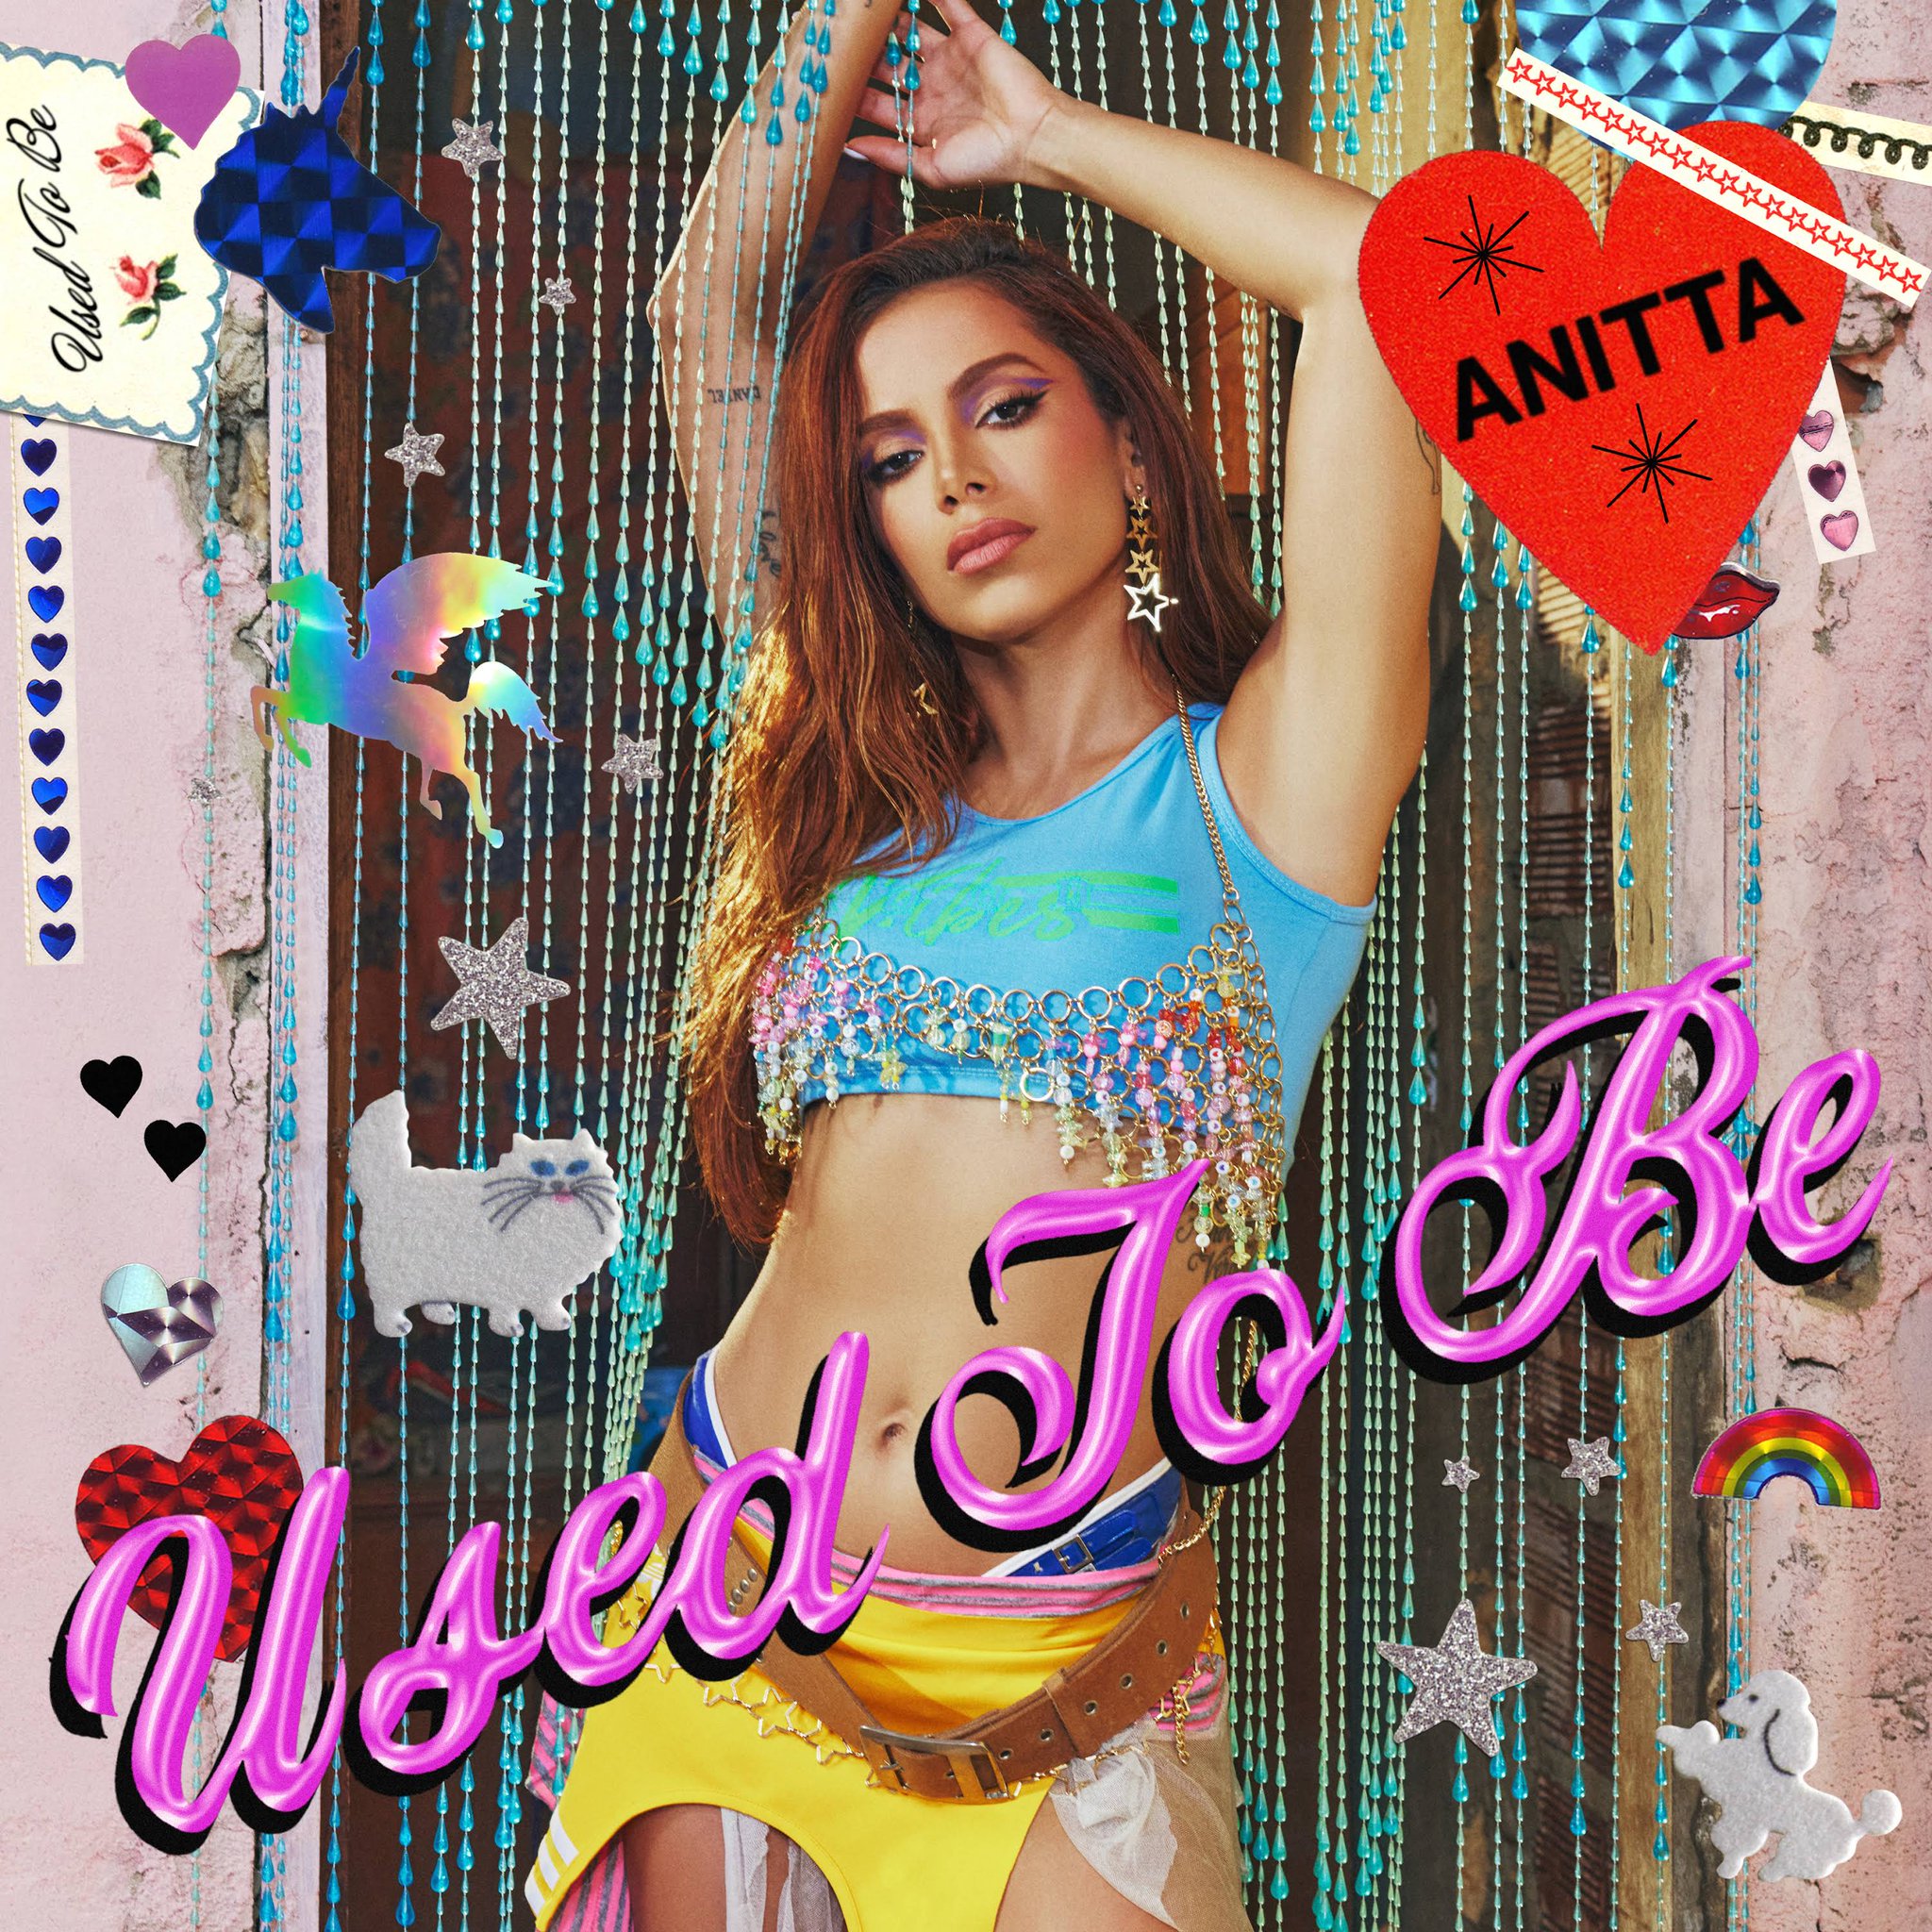 Anitta Used to Be cover artwork